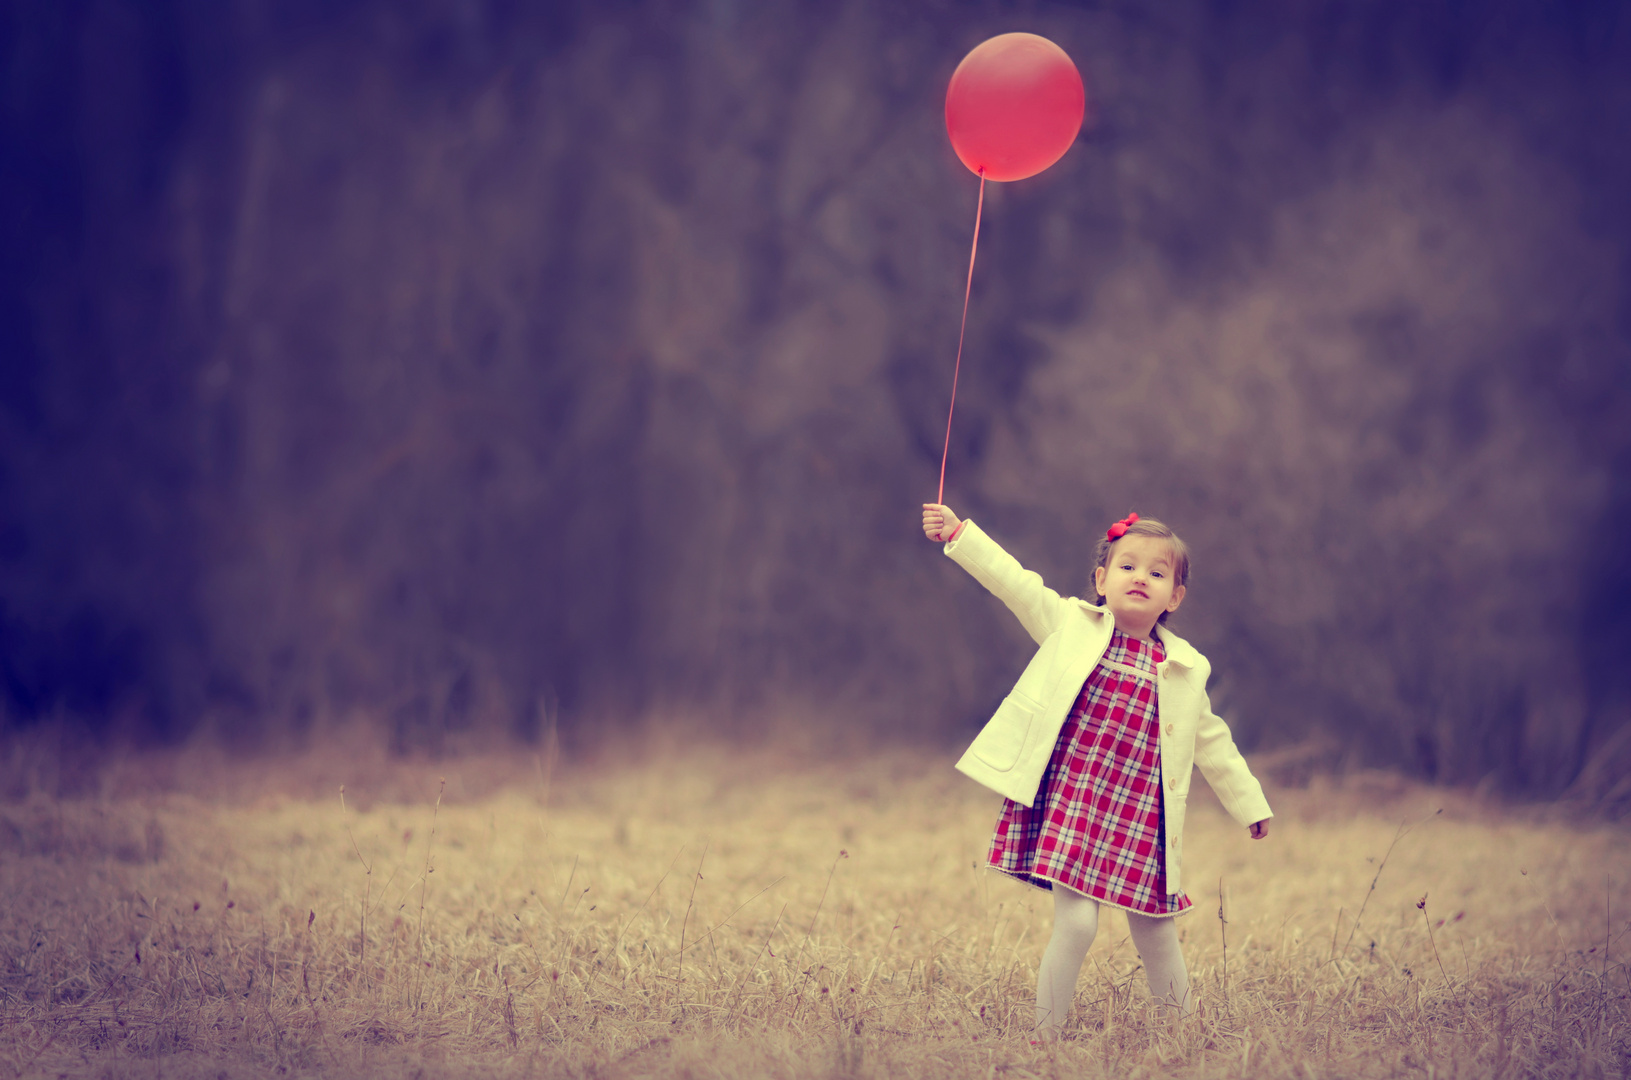 Girl with red balloon